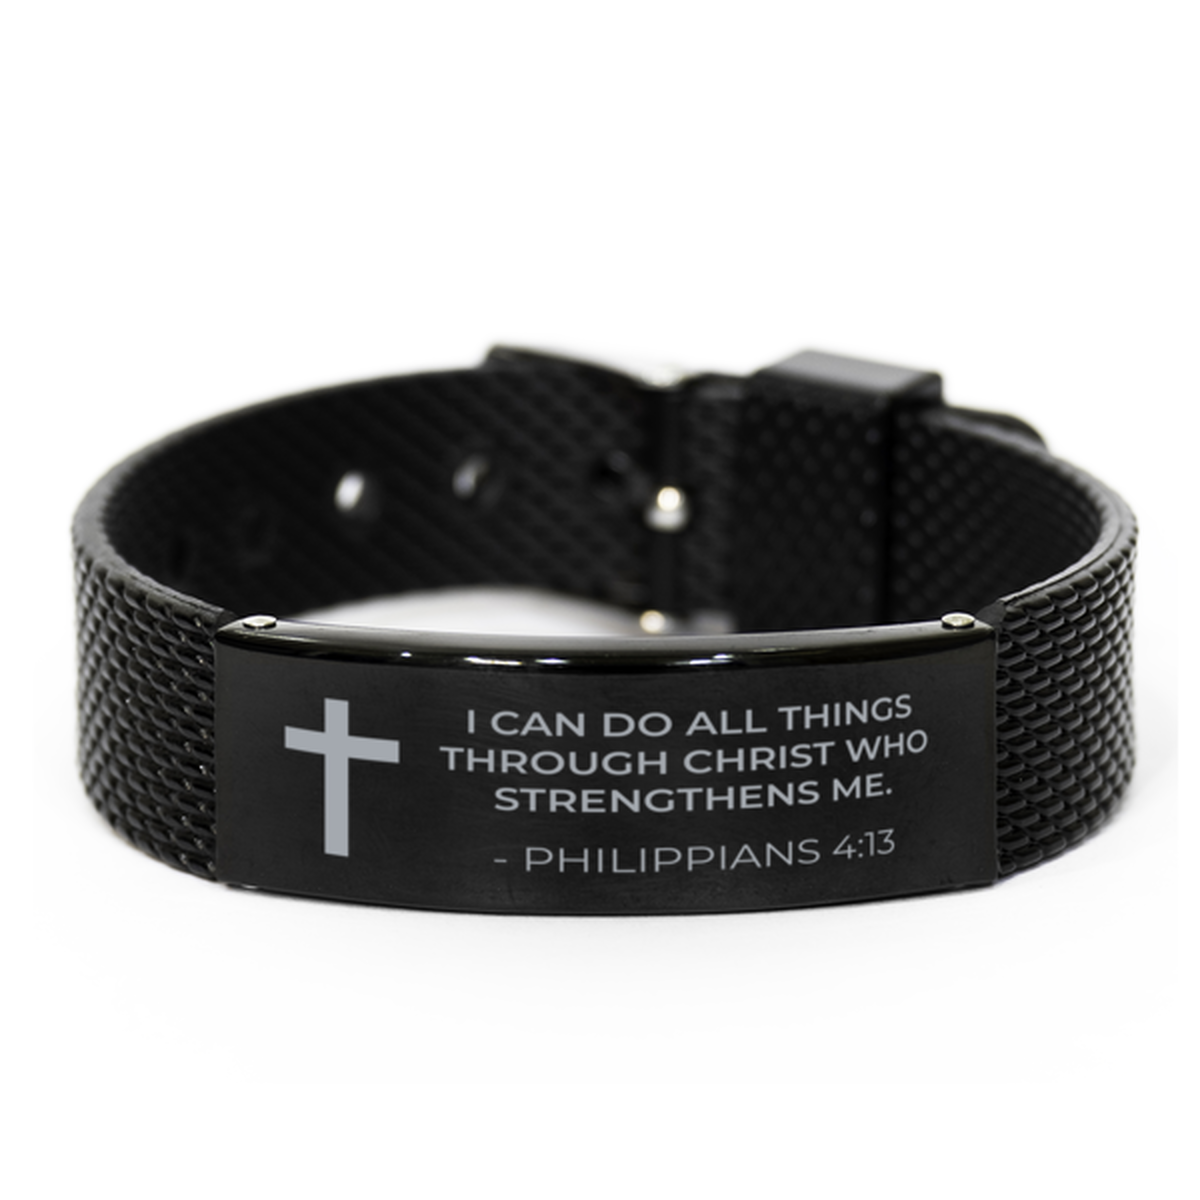 Christian Black Bracelet,, Philippians 4:13 I Can Do All Things Through Christ Who, Motivational Bible Verse Gifts For Men Women